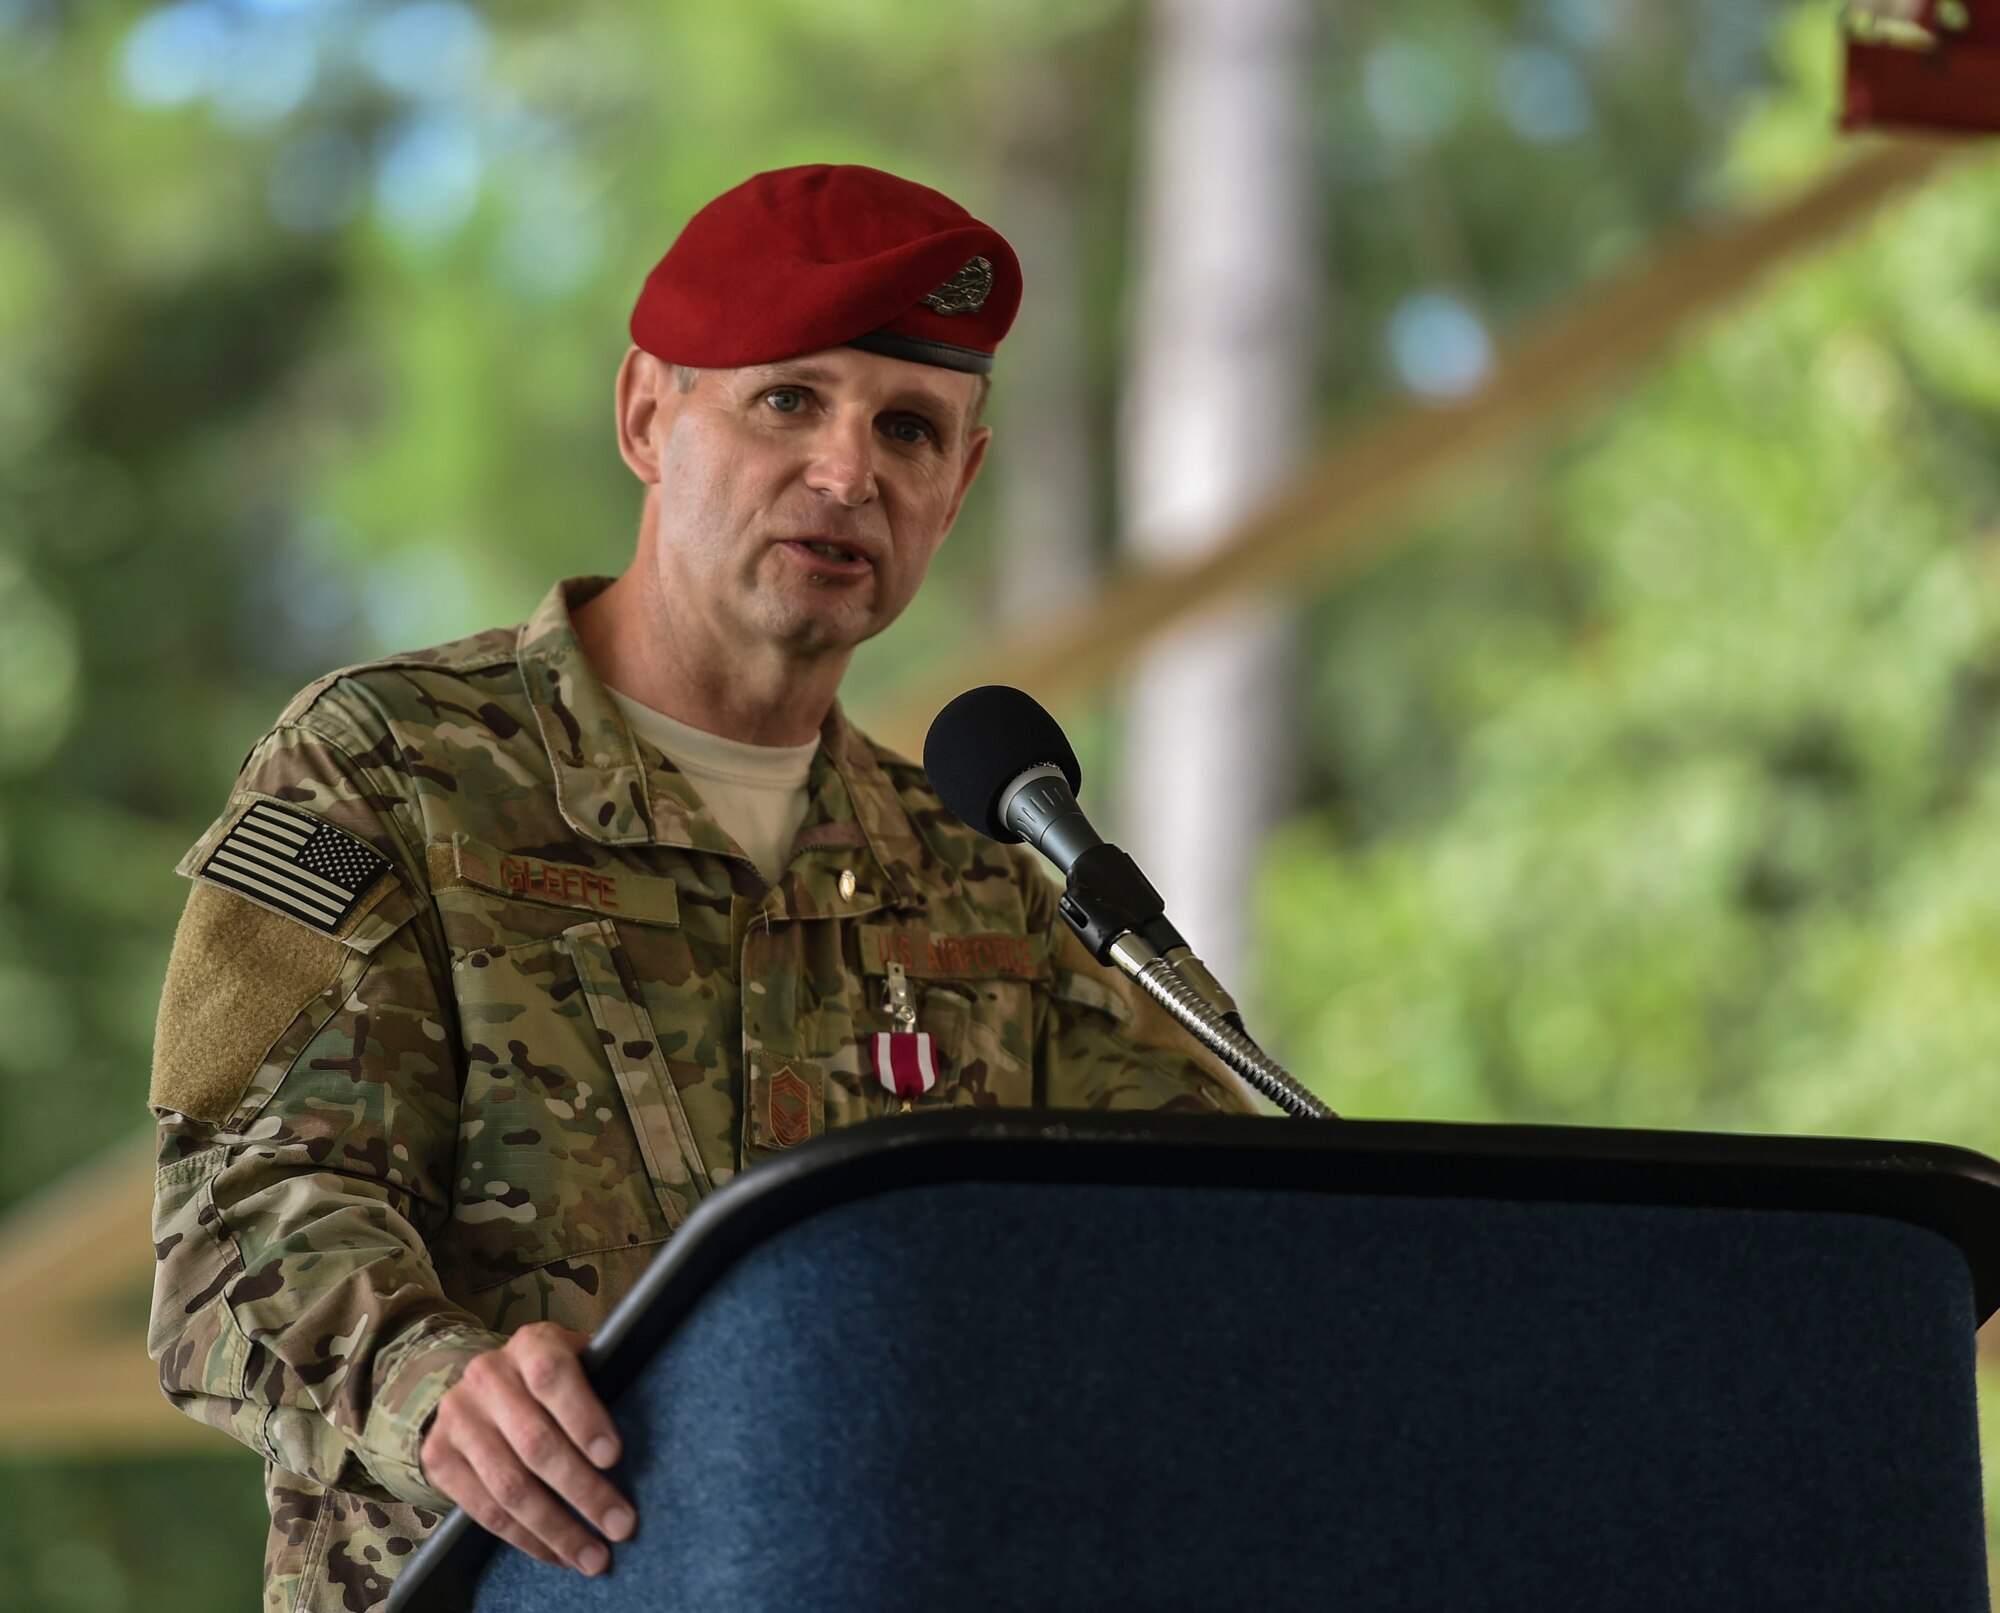 Chief Master Sgt. Sean Gleffe, combat control functional manager of Air Force Special Operations Command, speaks during his retirement ceremony at Hurlburt Field, Fla., July 15, 2016. Gleffe retired after 30 years as a Special Tactics combat controller. Throughout his Special Tactics career, Gleffe was certified a static line jump master, military freefall jump master and military dive supervisor. (U.S. Air Force photo by Senior Airman Ryan Conroy) 